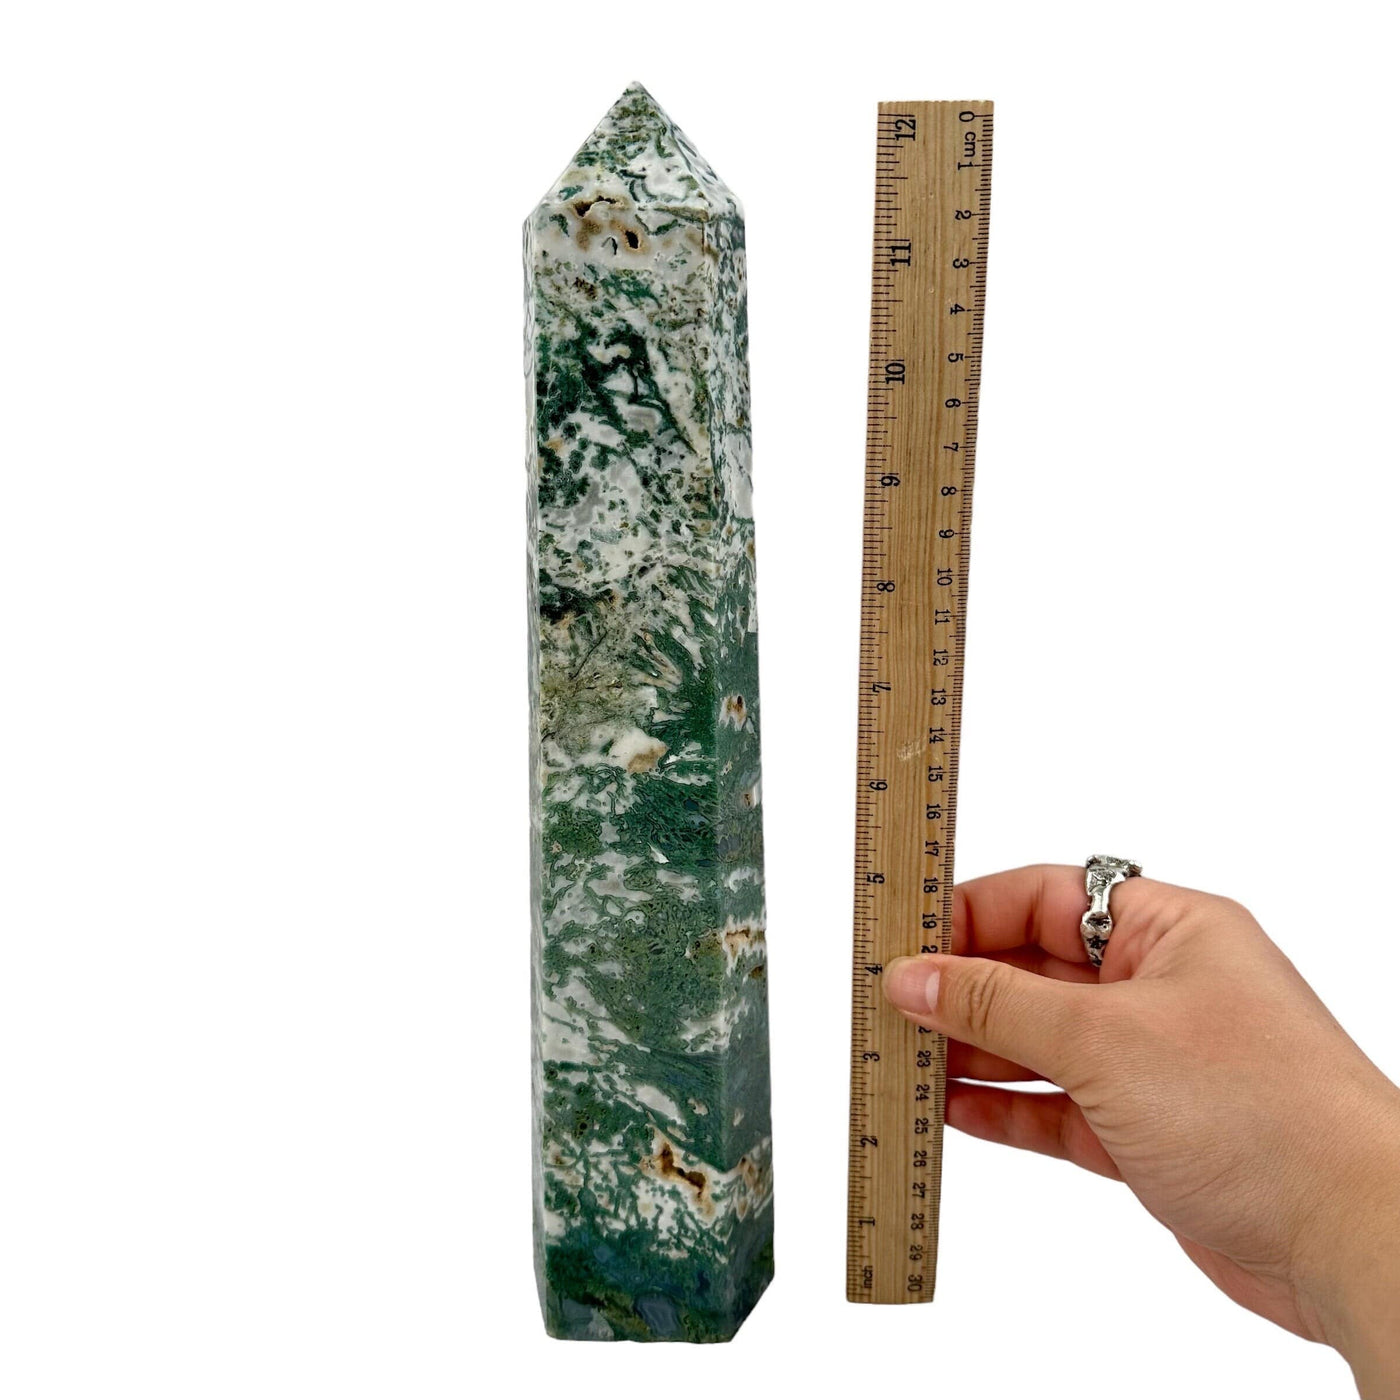 Moss Agate Tower - OOAK - OOAK front view with ruler and hand for size reference